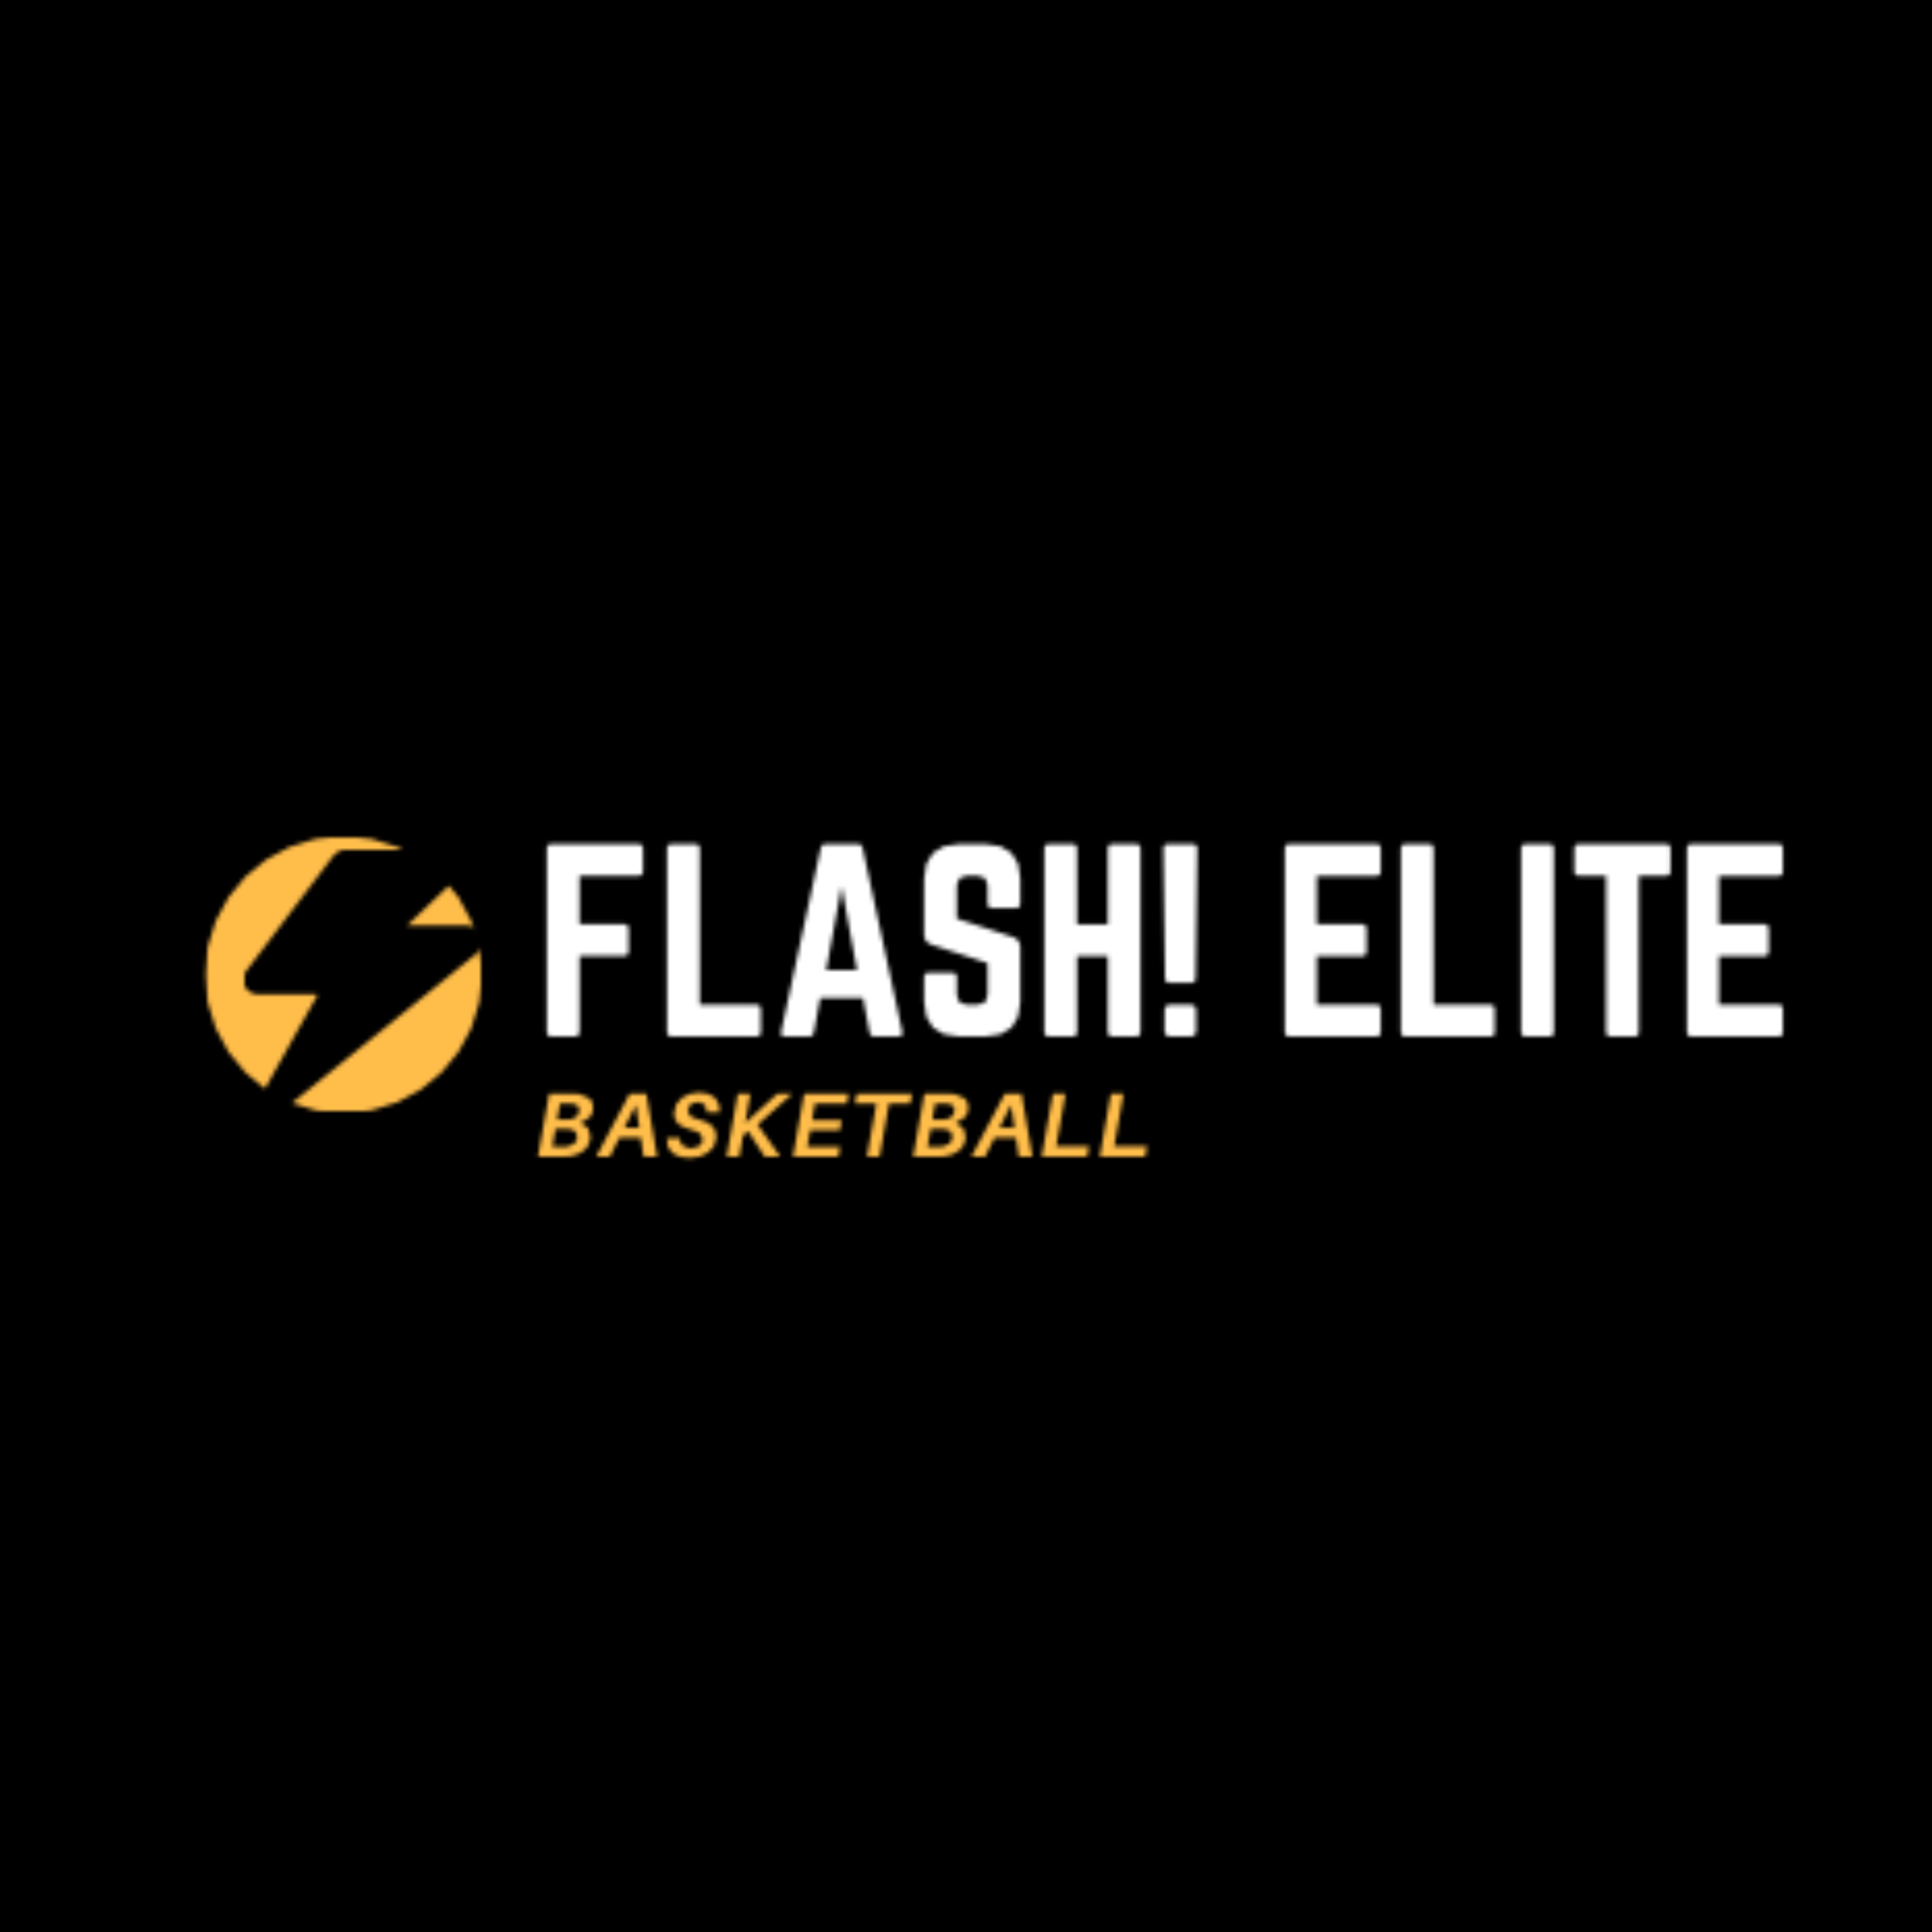 The official logo of FLASH! ELITE